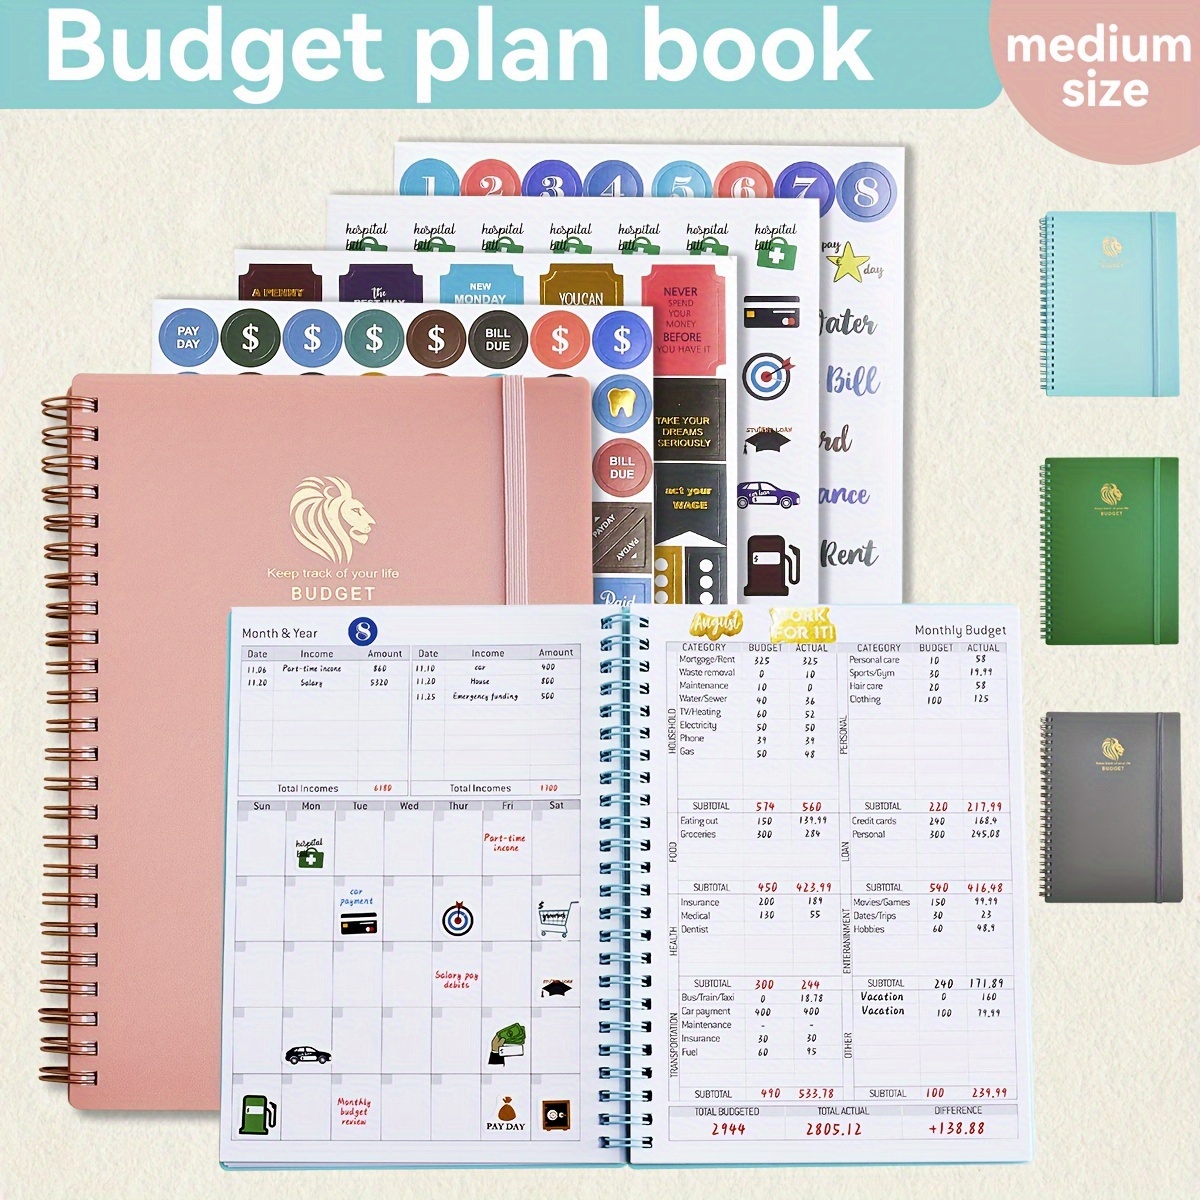 Budget Planner - Monthly Finance Organizer with Expense Tracker Notebook to  Manage Your Money Effectively, Undated Finance Planner/Account Book, Start